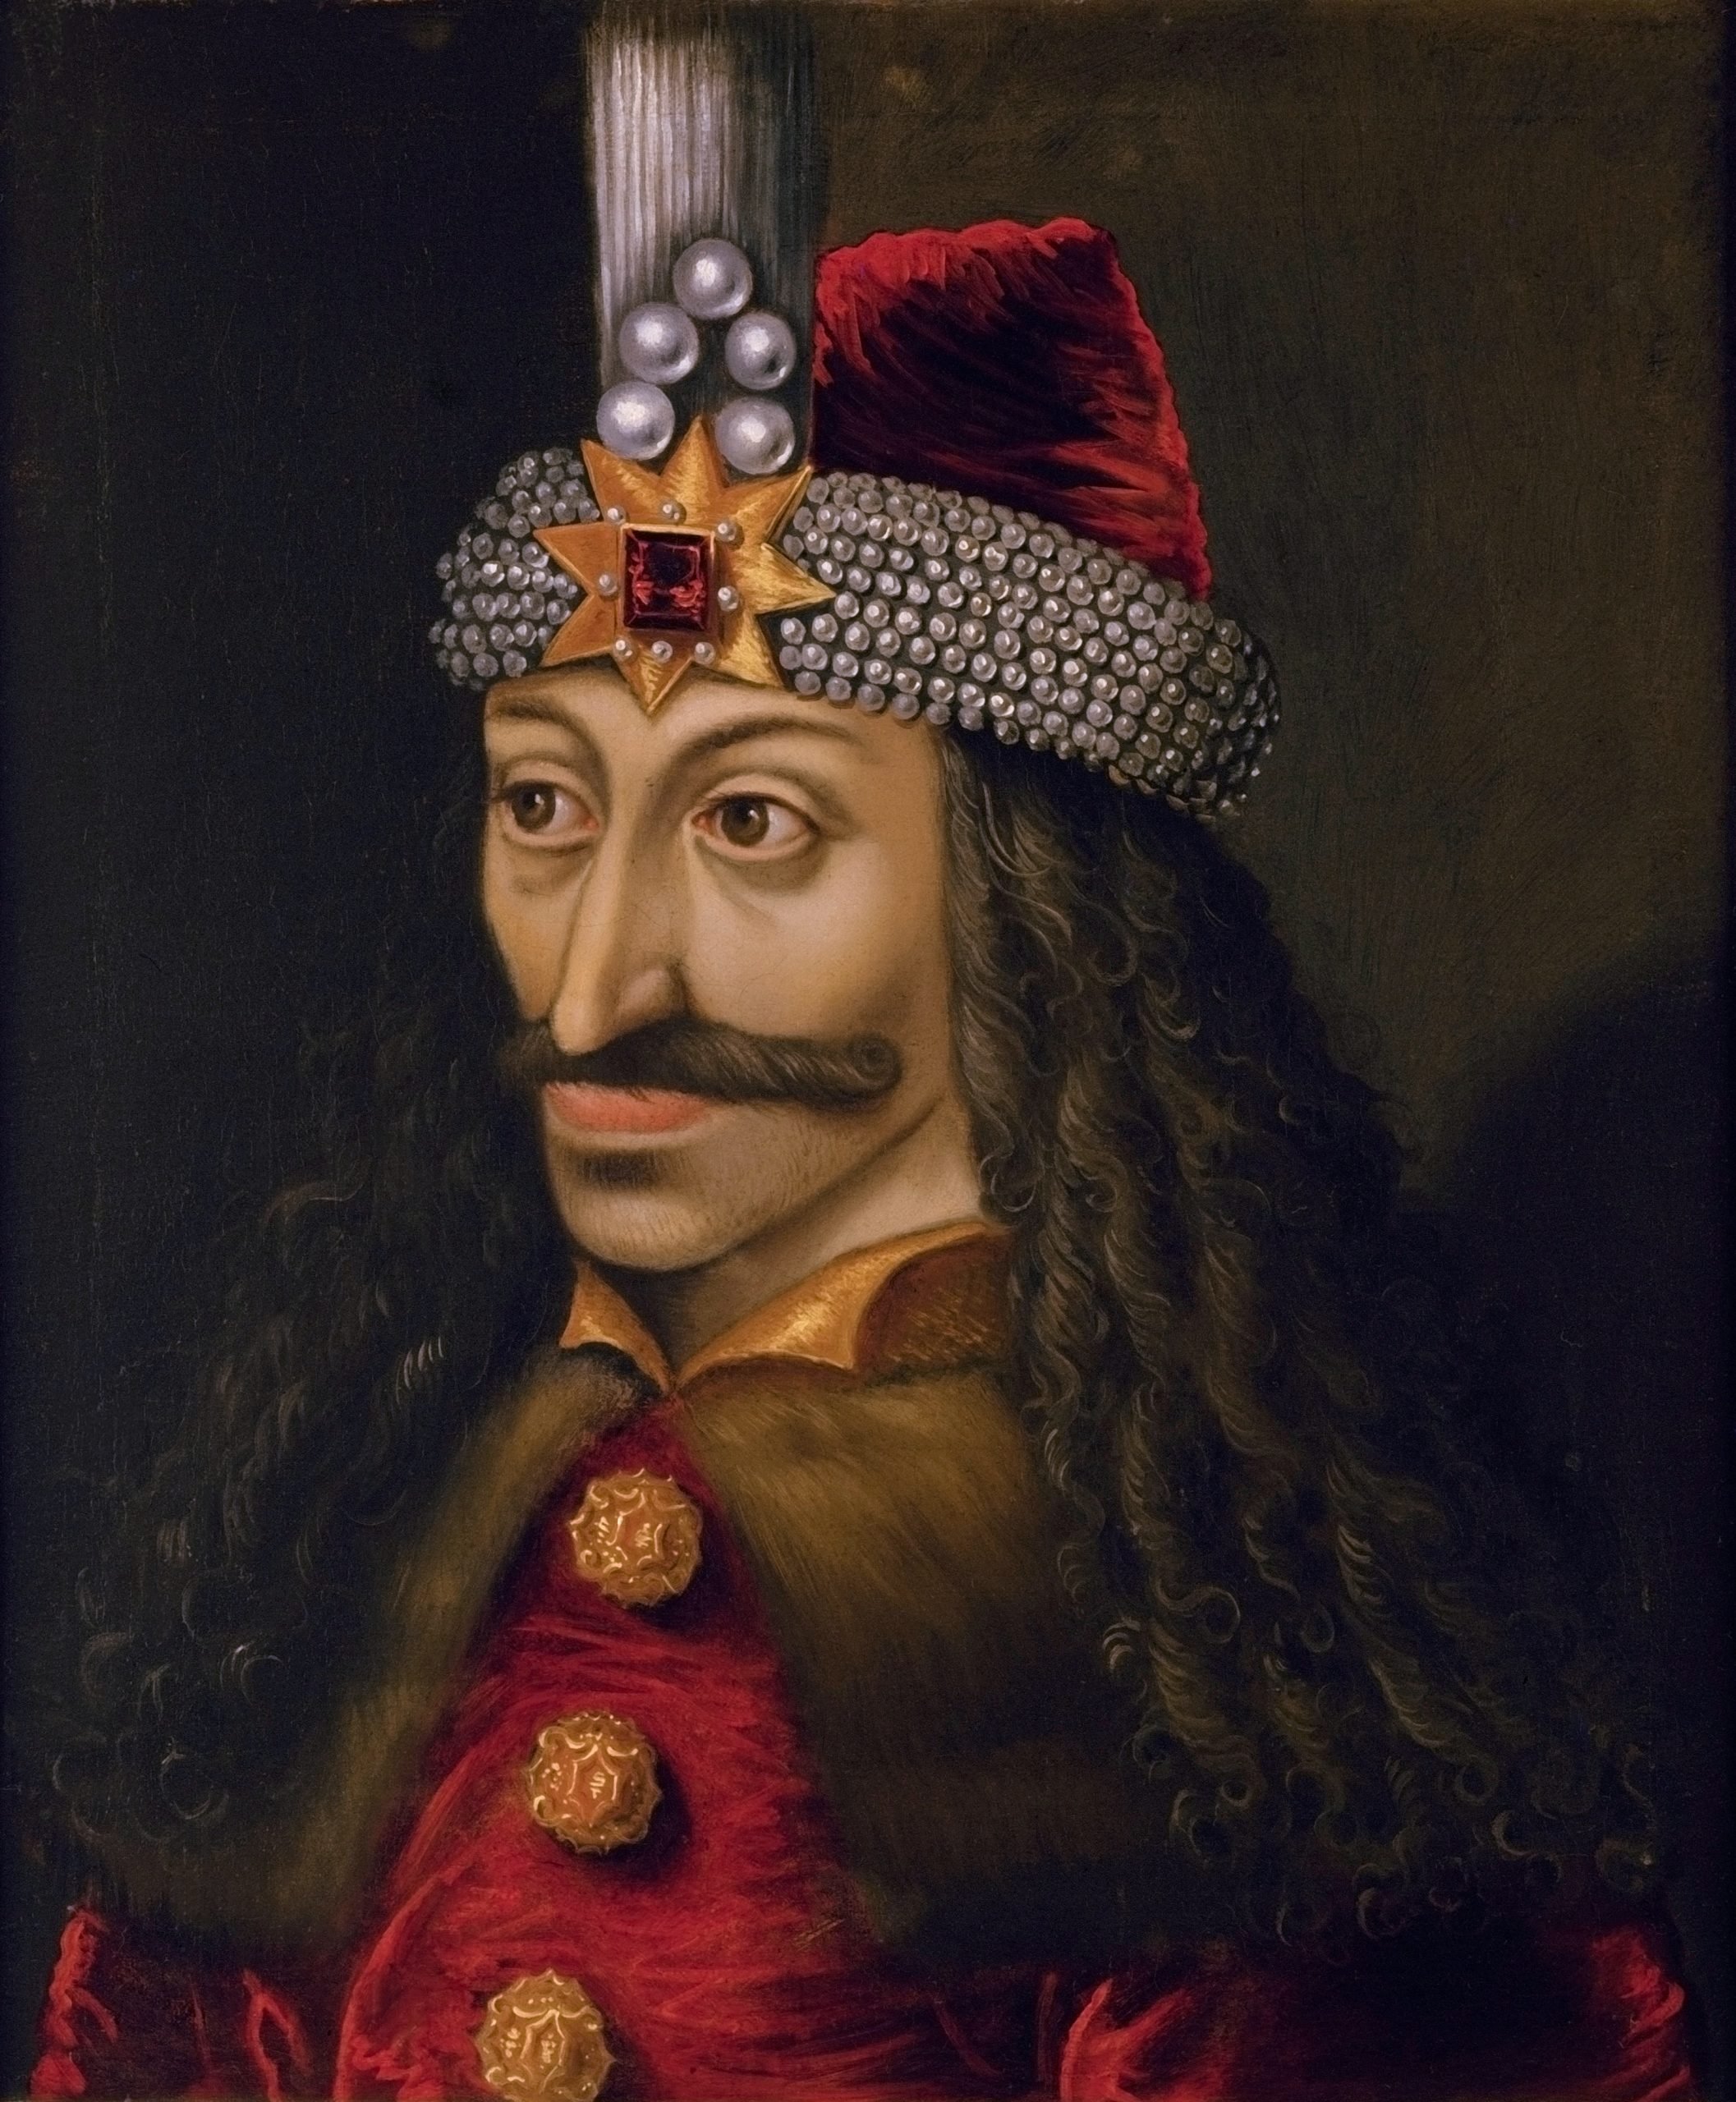 Vlad the Impaler, former Voivode of Wallachia, commonly known as Vlad the Impaler or Vlad Dracula, Transylvania - Interesting Facts To Know